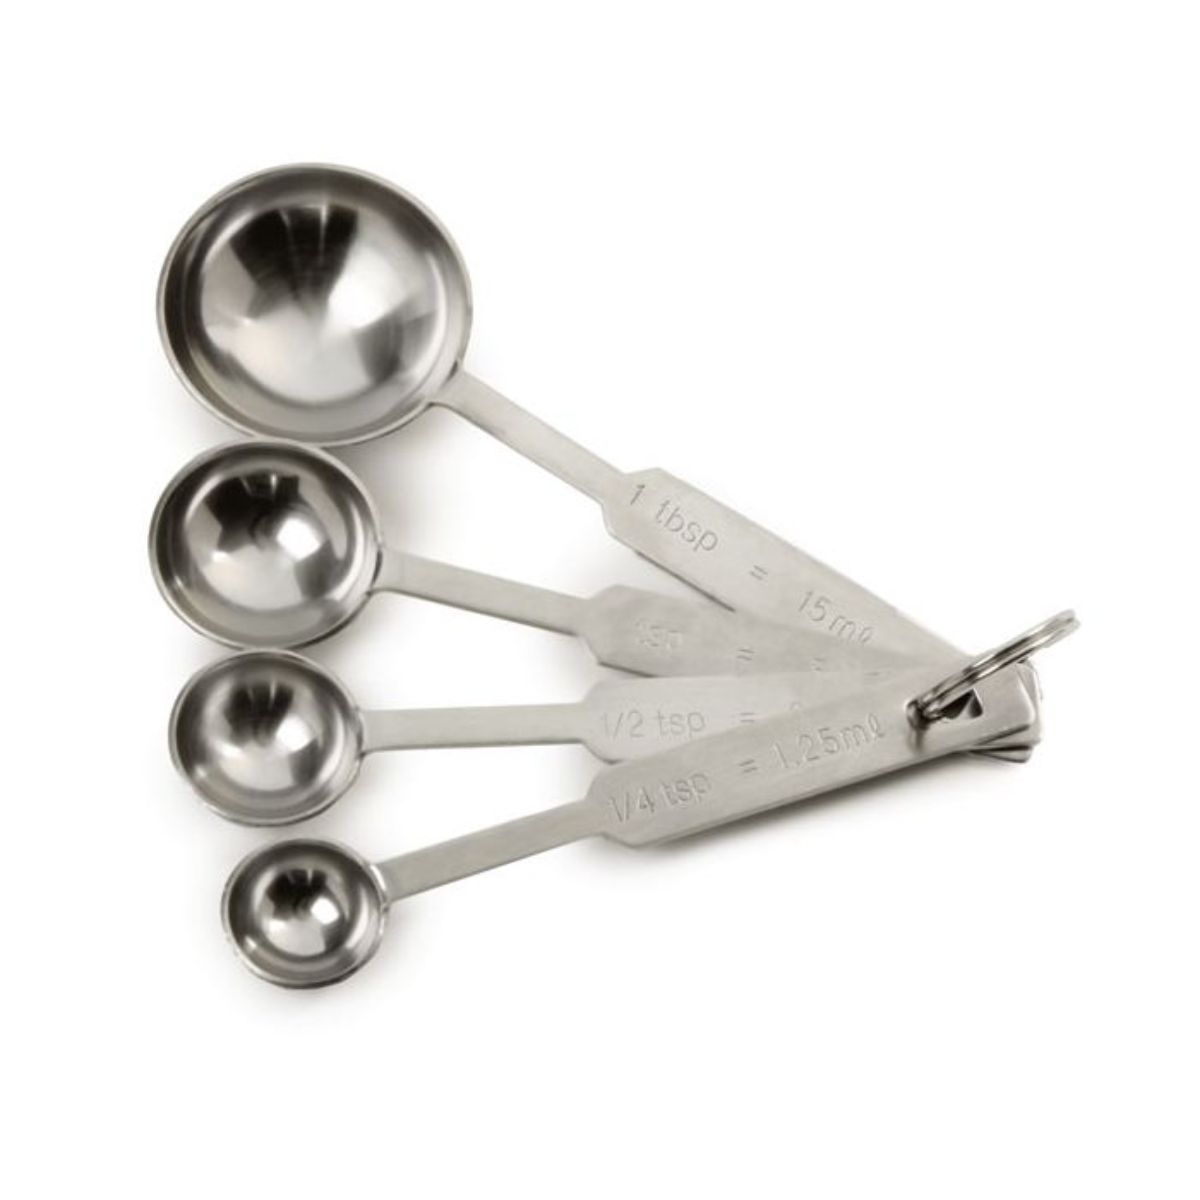 Norpro Stainless Steel Measuring Spoons Set of 4